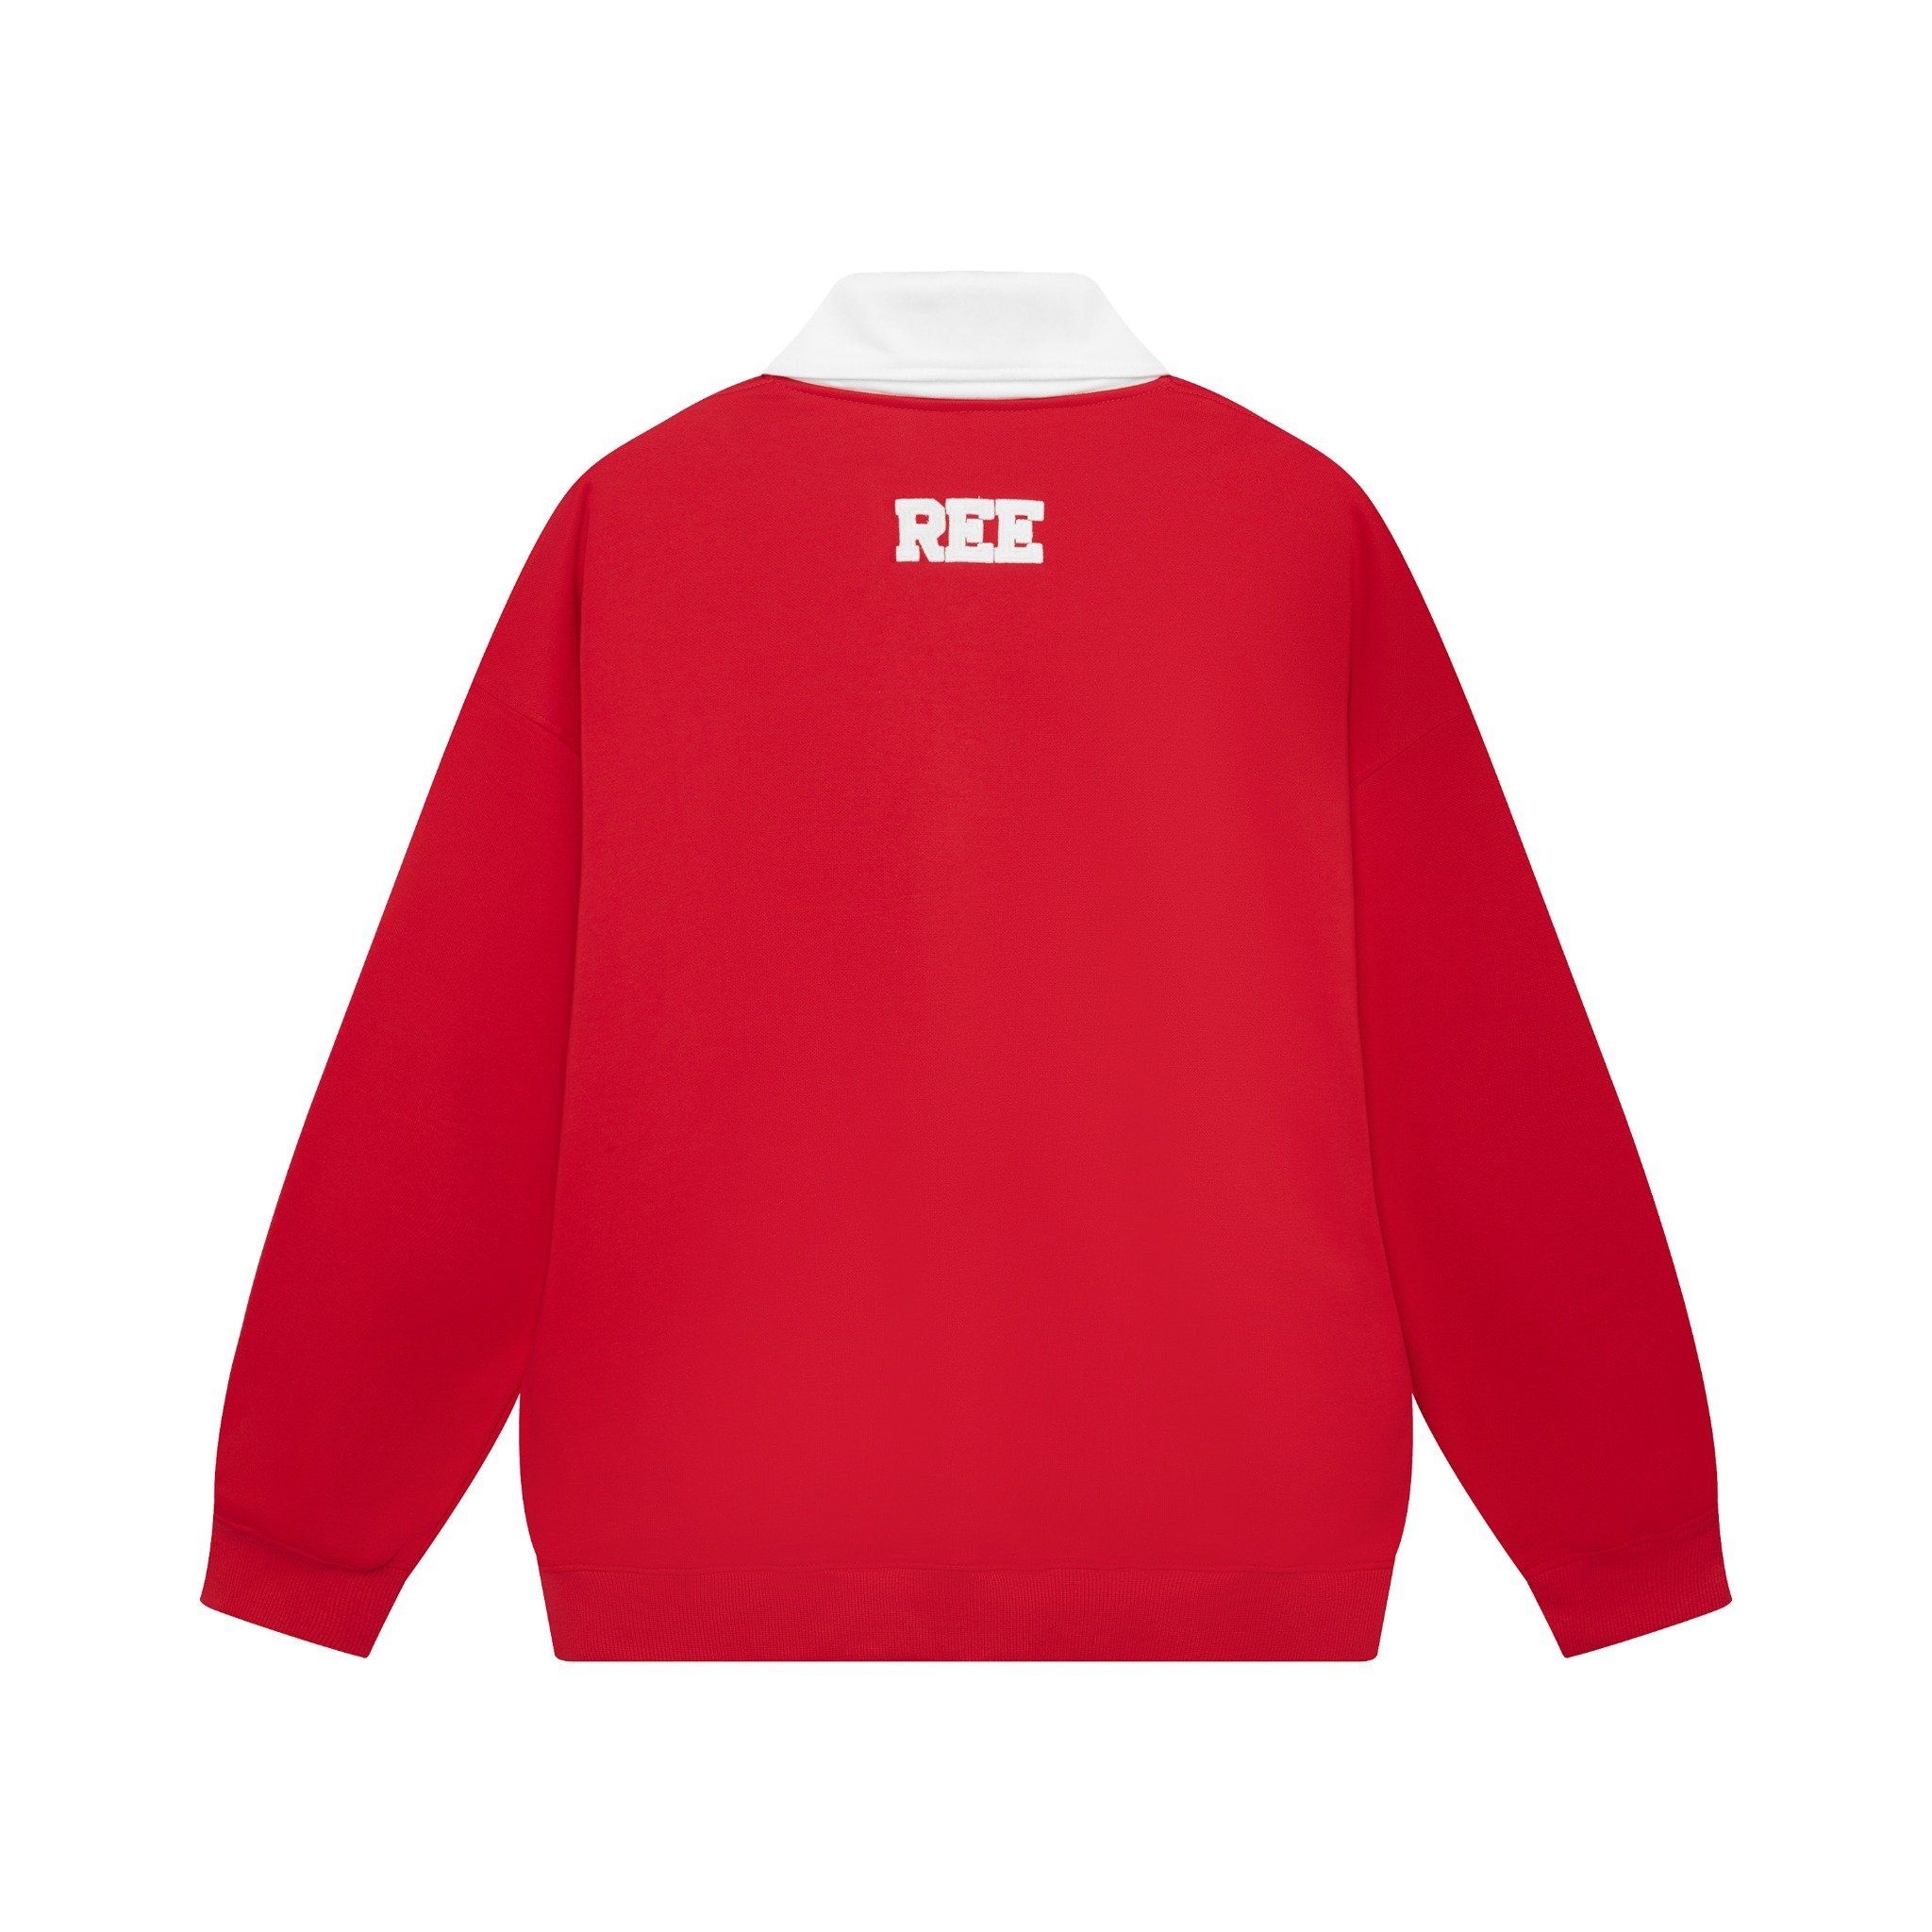 REE BASEBALL POLO SWEATER - RED